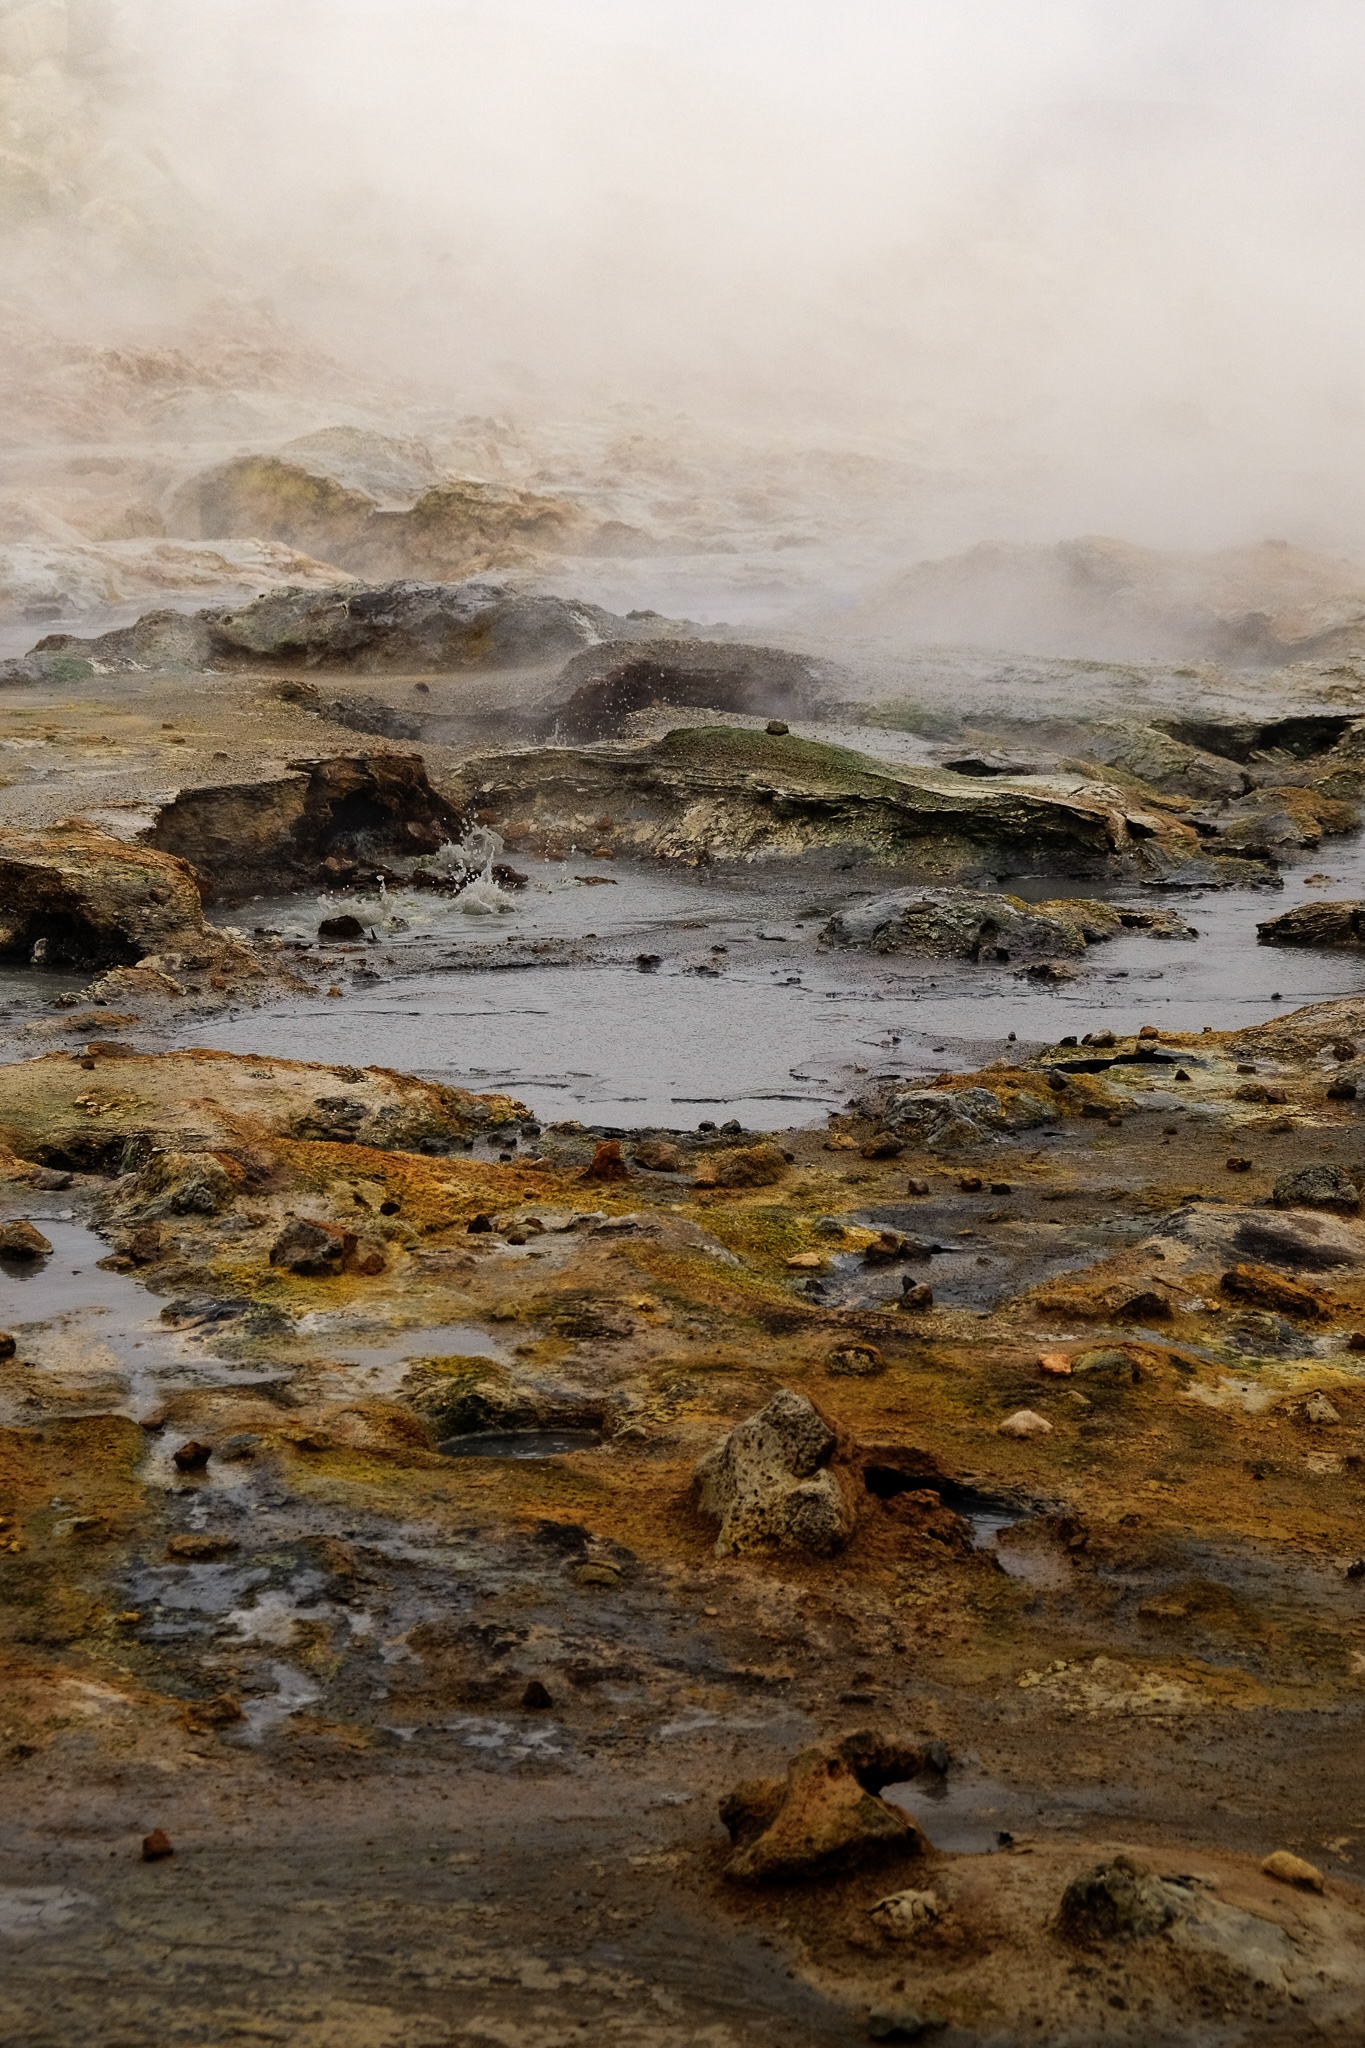 Multi-coloured mineral deposits on rocks with a boiling puddle of water in a geothermal area in Iceland